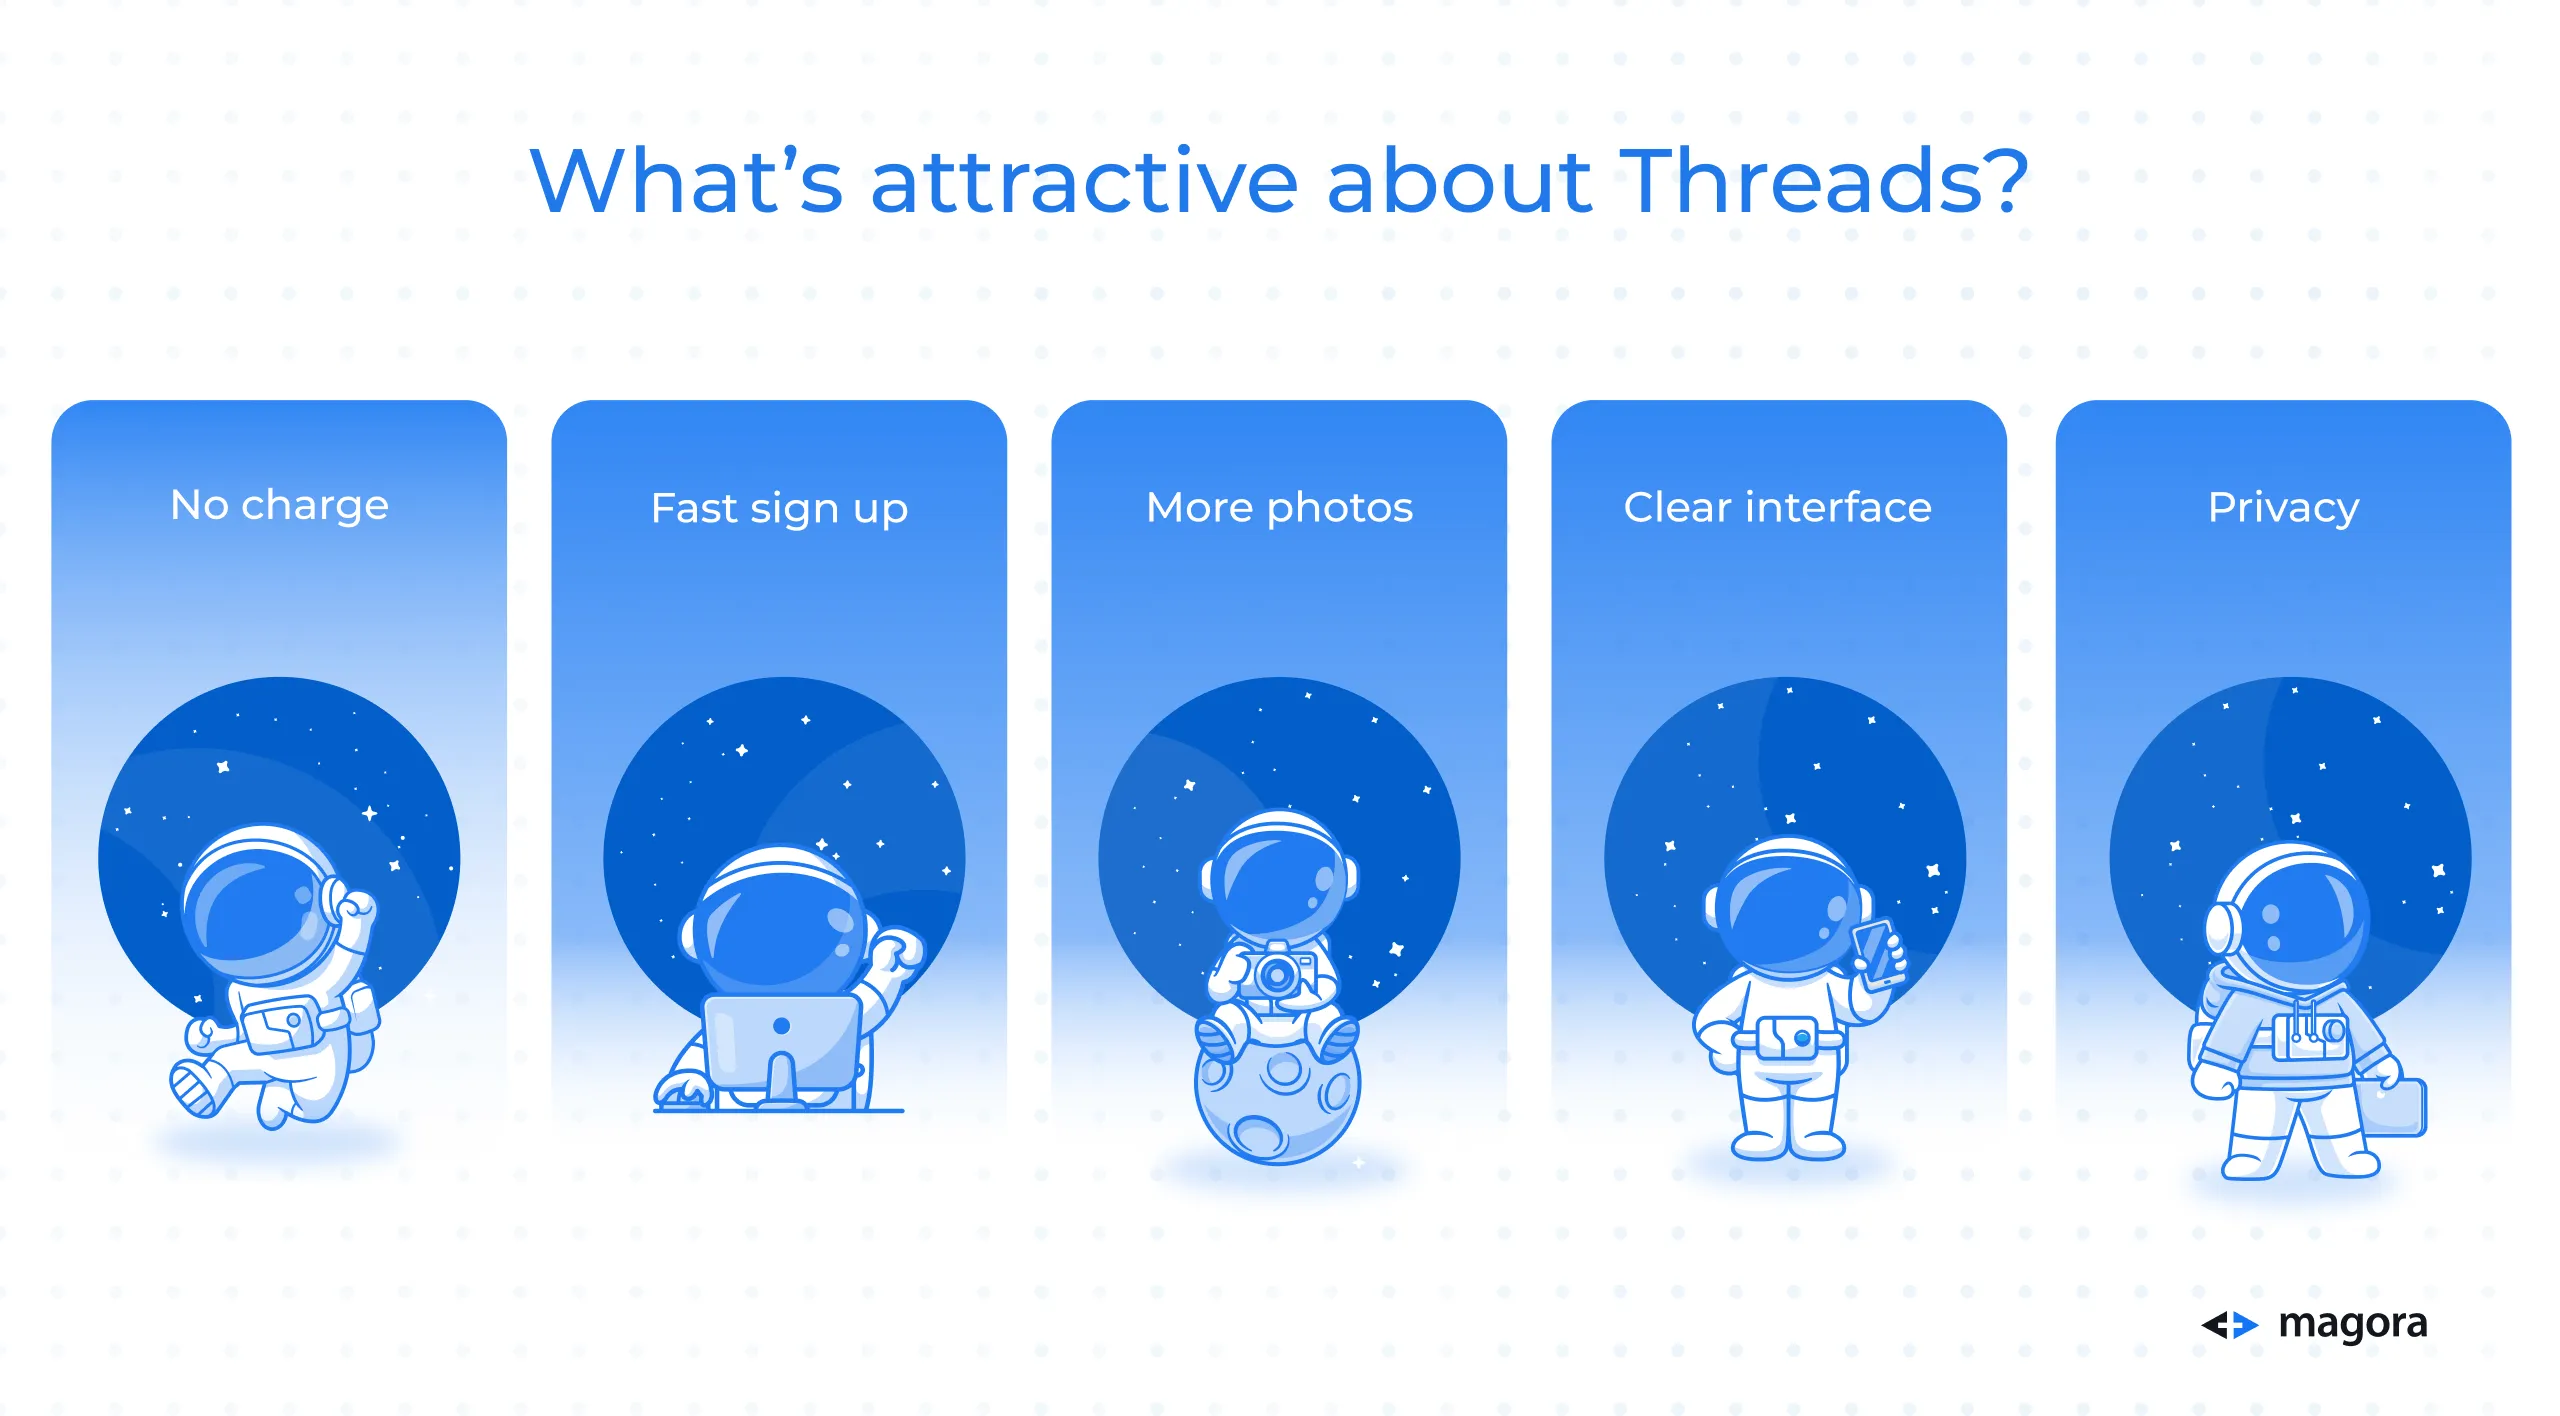 What’s attractive about Threads